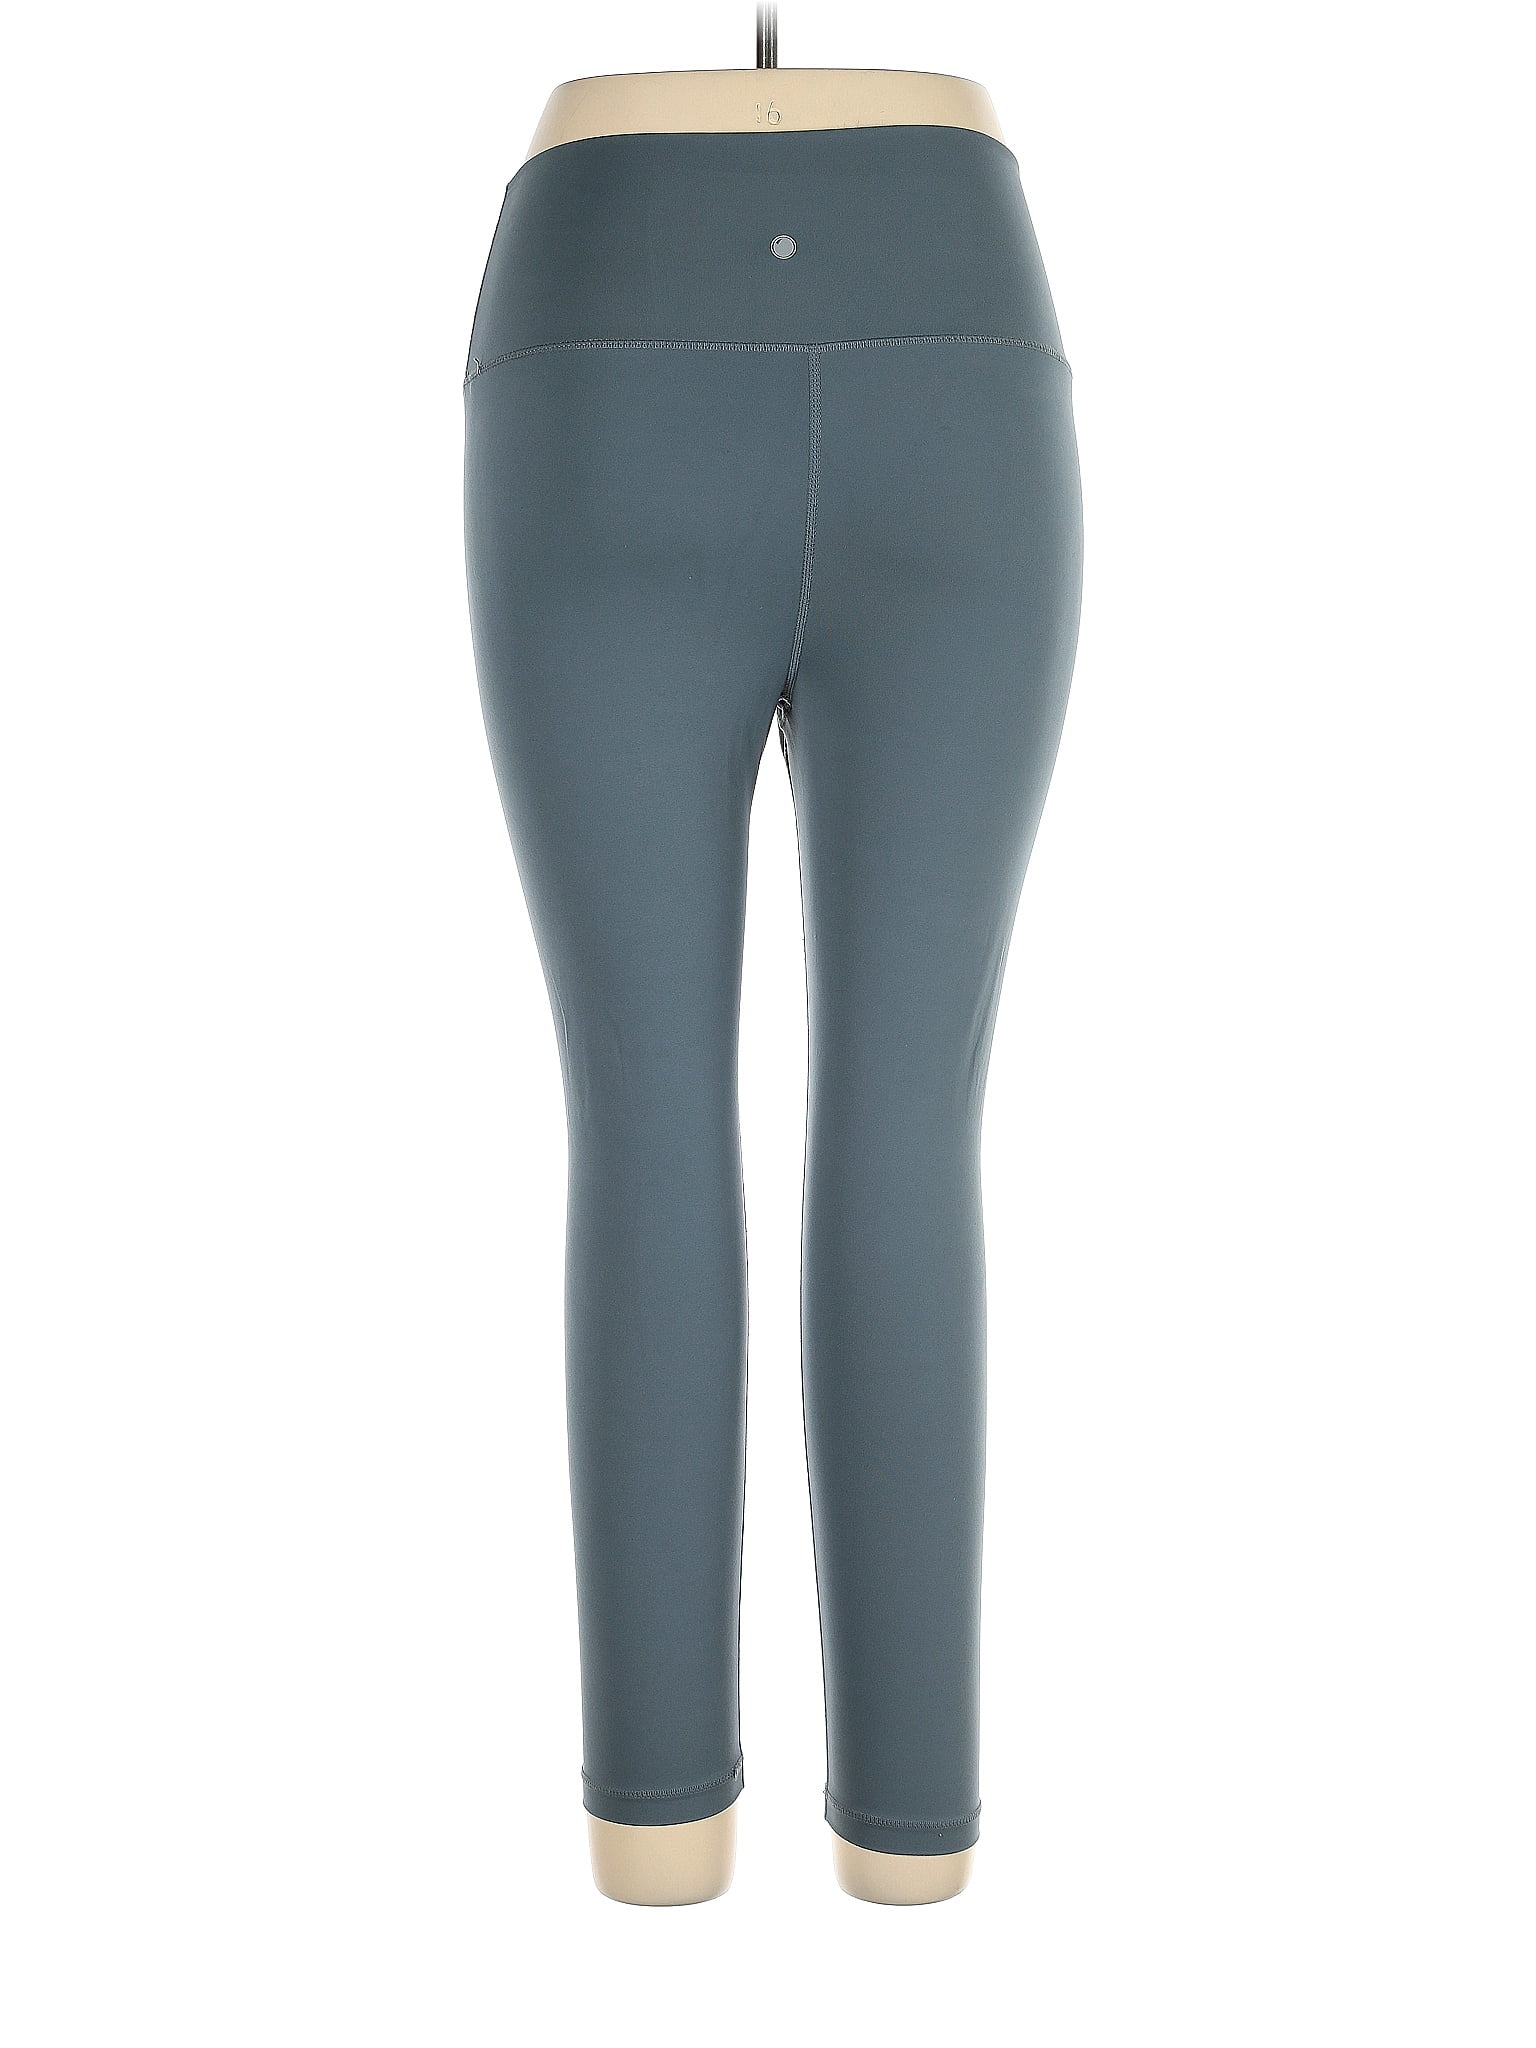 Yogalicious Solid Teal Yoga Pants Size XL - 68% off